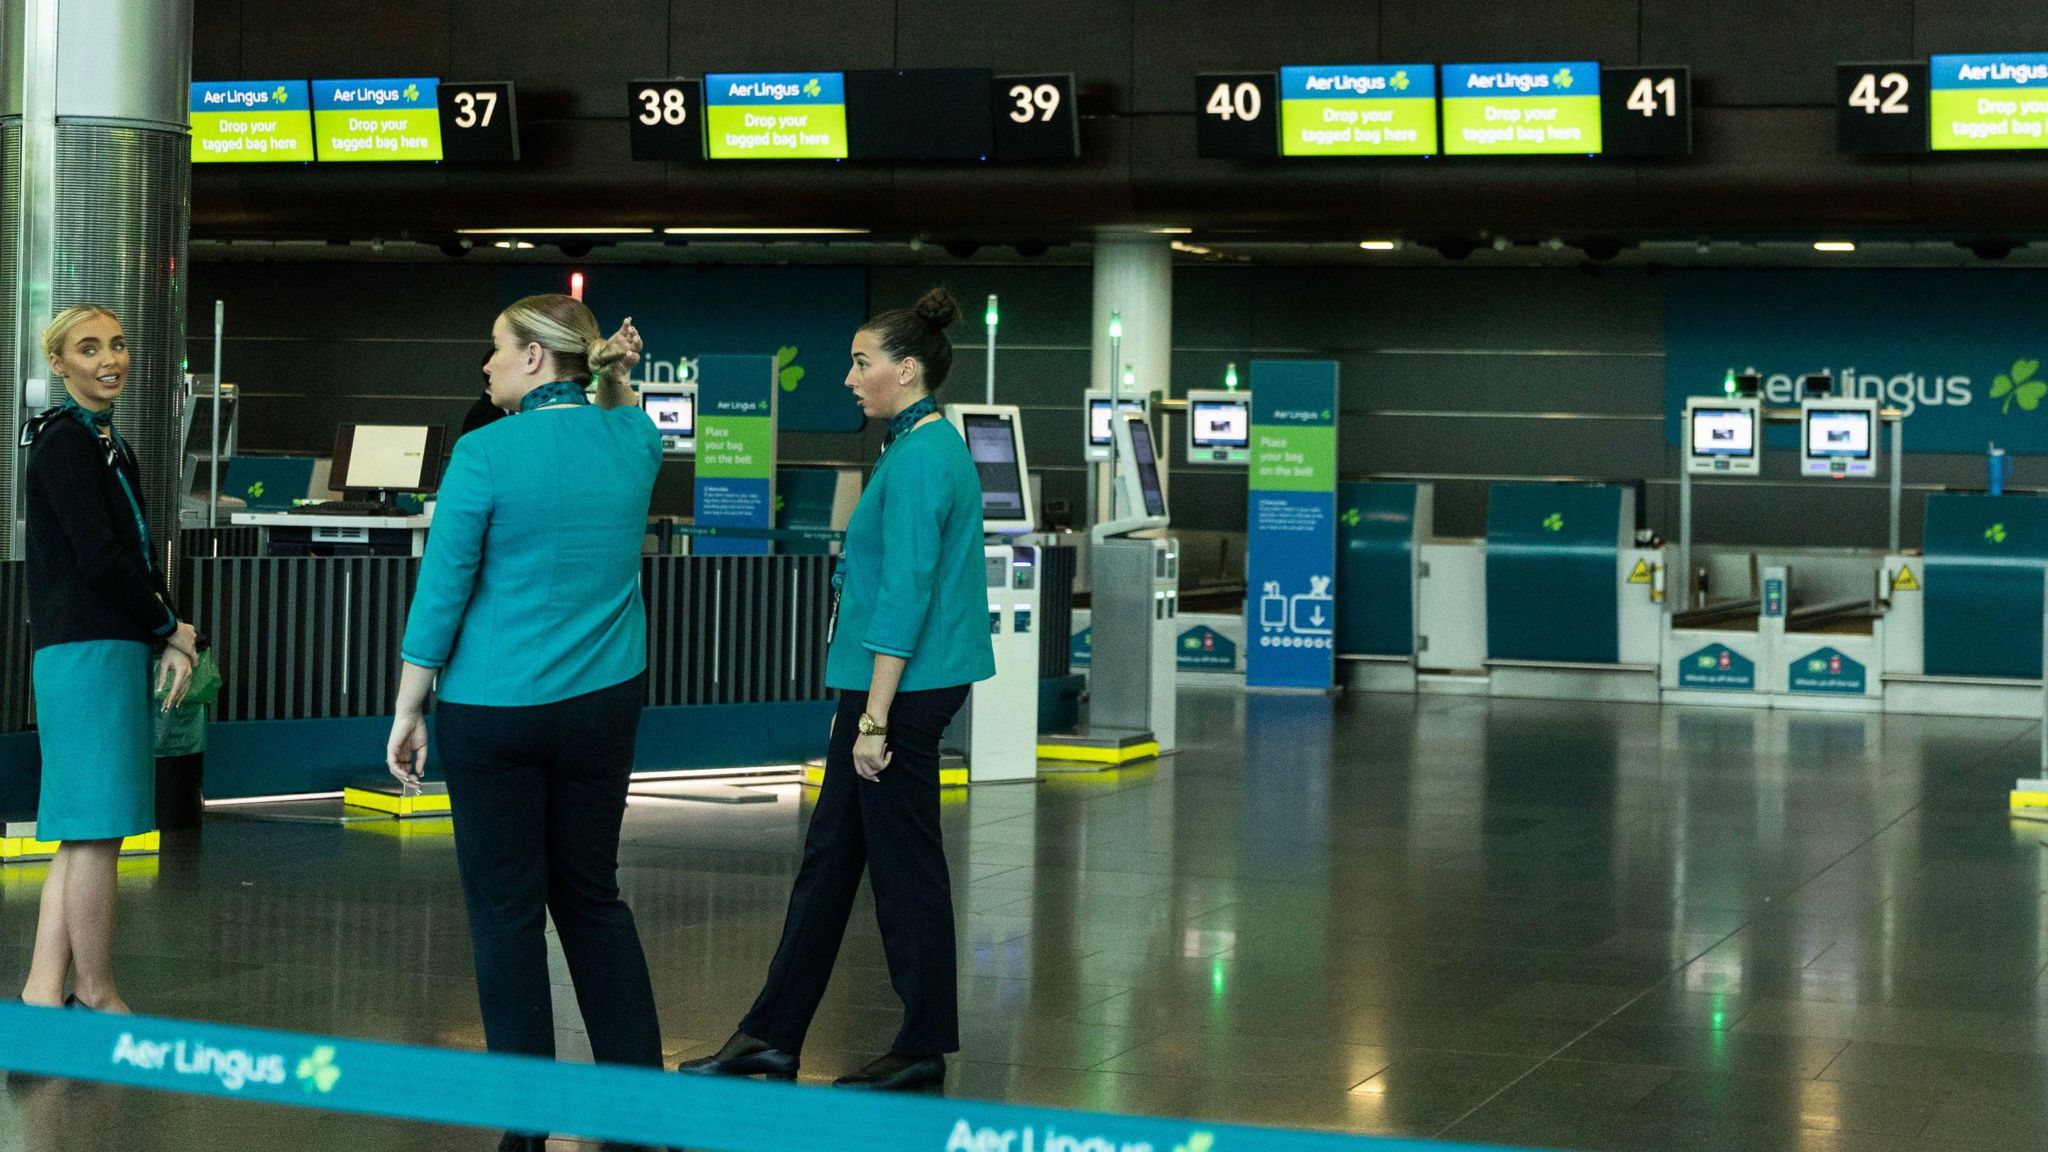 Three Aer Lingus staff at the check in desks at Dublin airport. There are no passengers to be seen anywhere due to pilots's strike